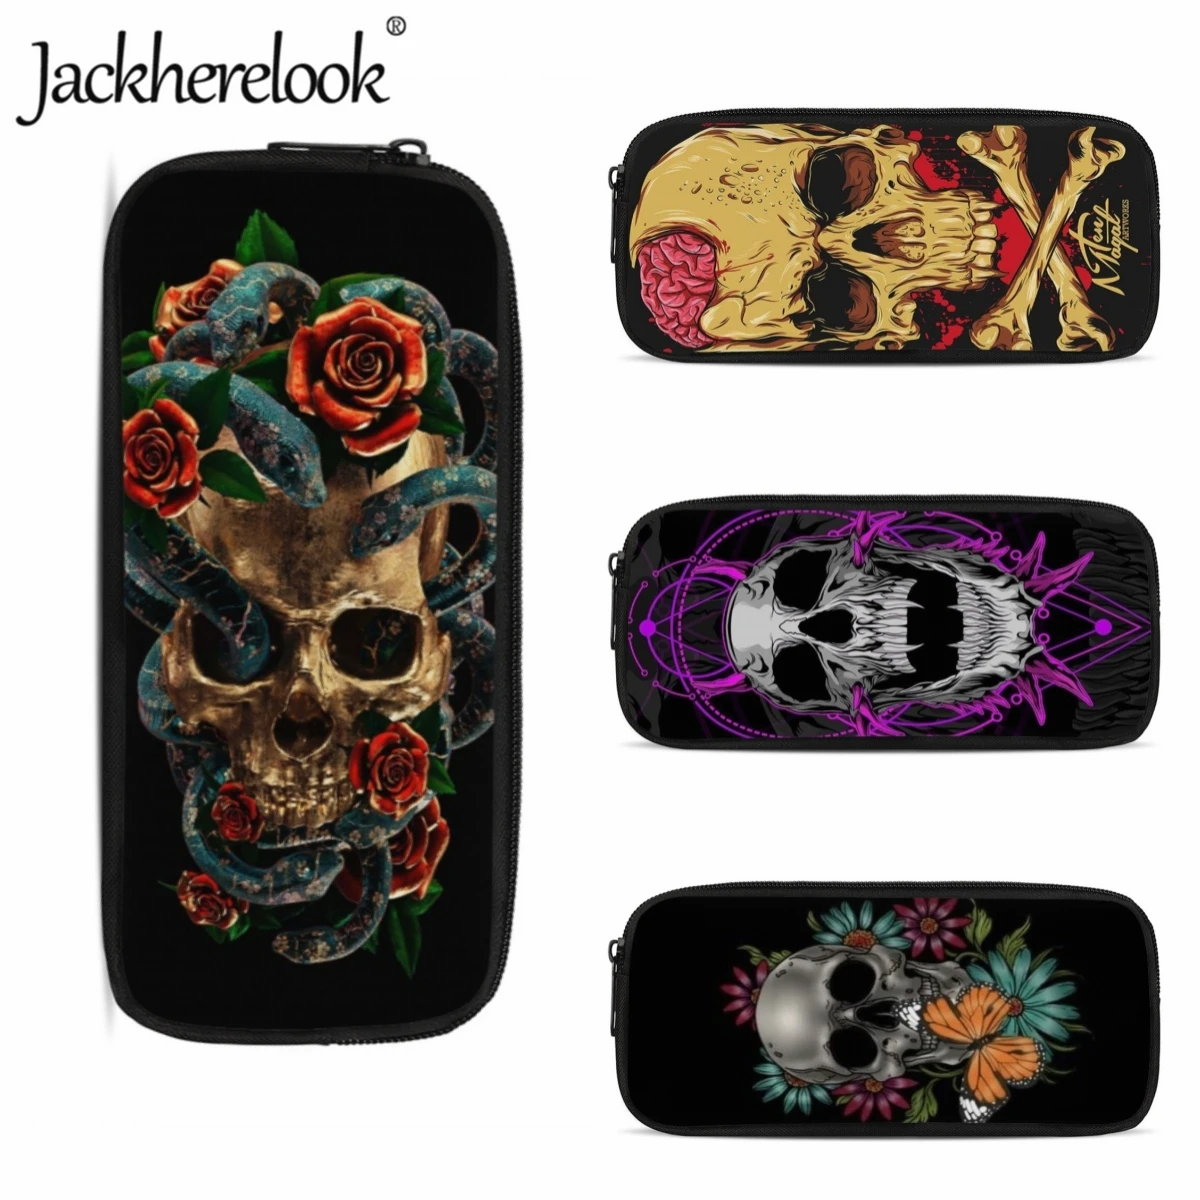 

Jackherelook Gothic Skull Design Pencil Case Boys Girls Makeup Bags Horror Style High Student School Supplies Pencil Pouch Bags